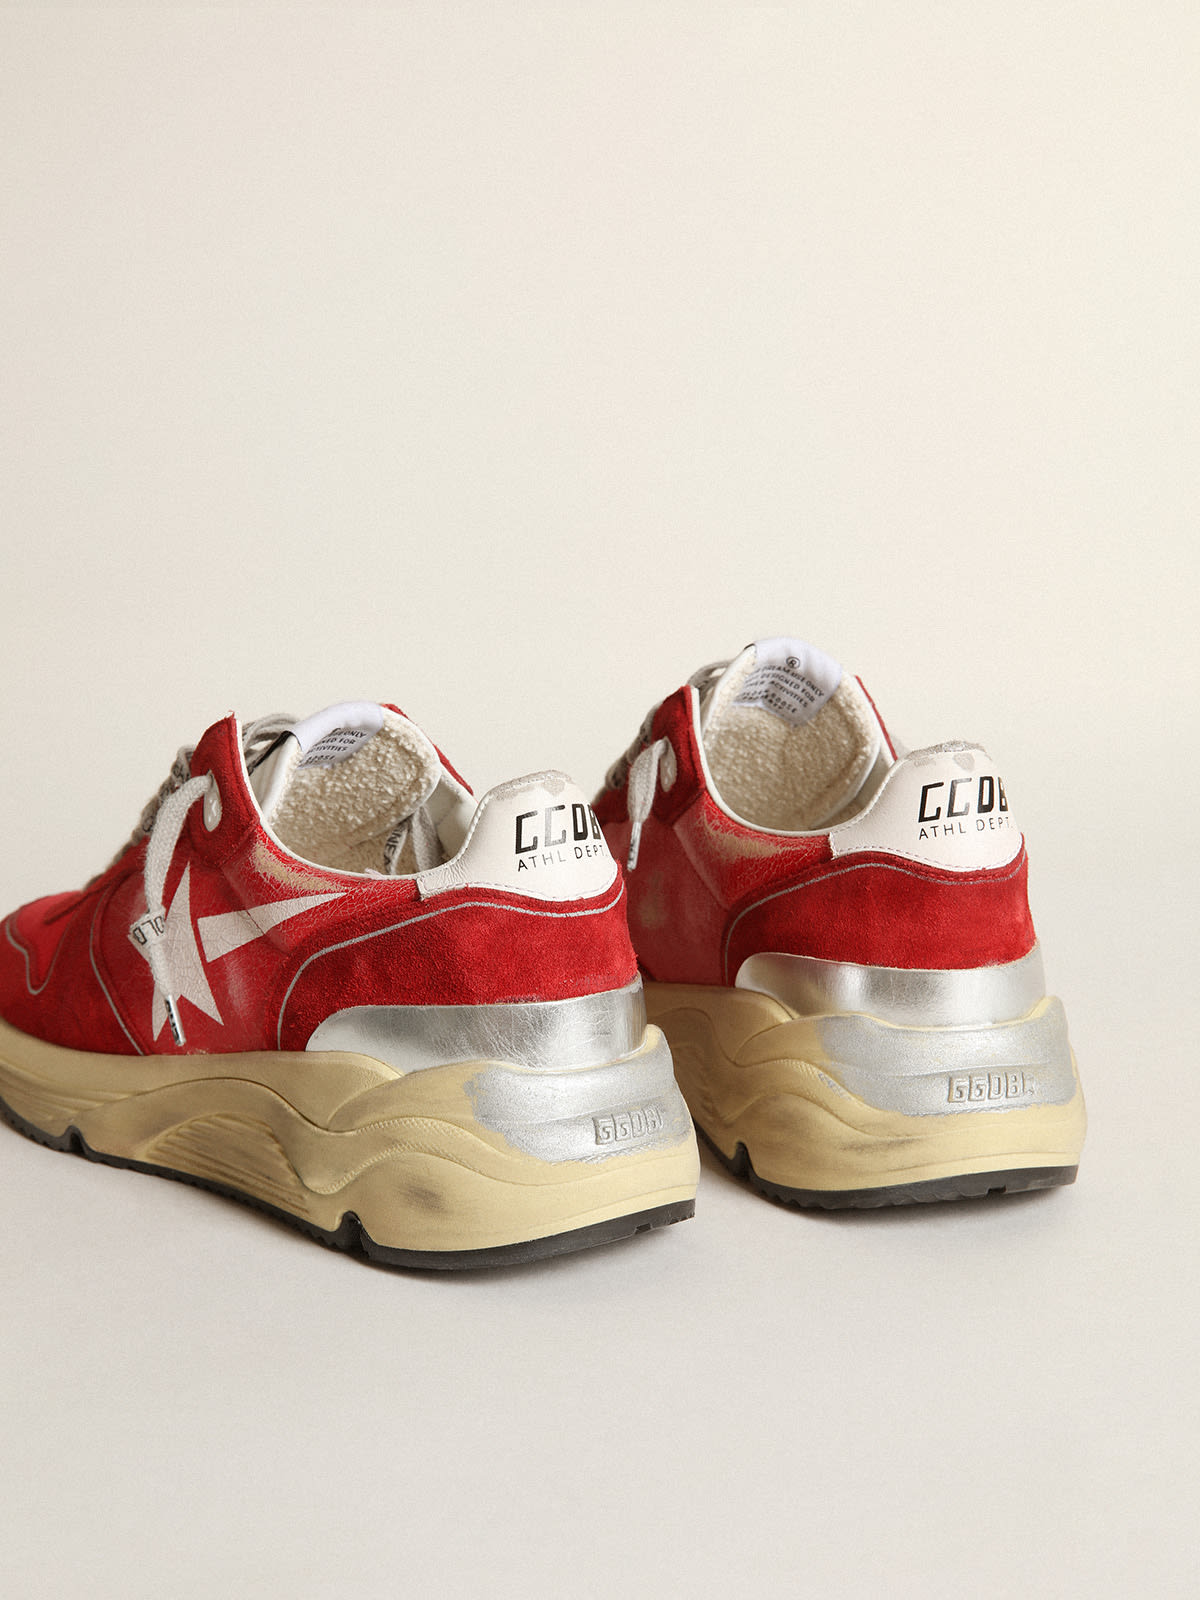 Golden Goose - Running Sole sneakers in red crackle leather with red suede inserts and screen-printed white star in 